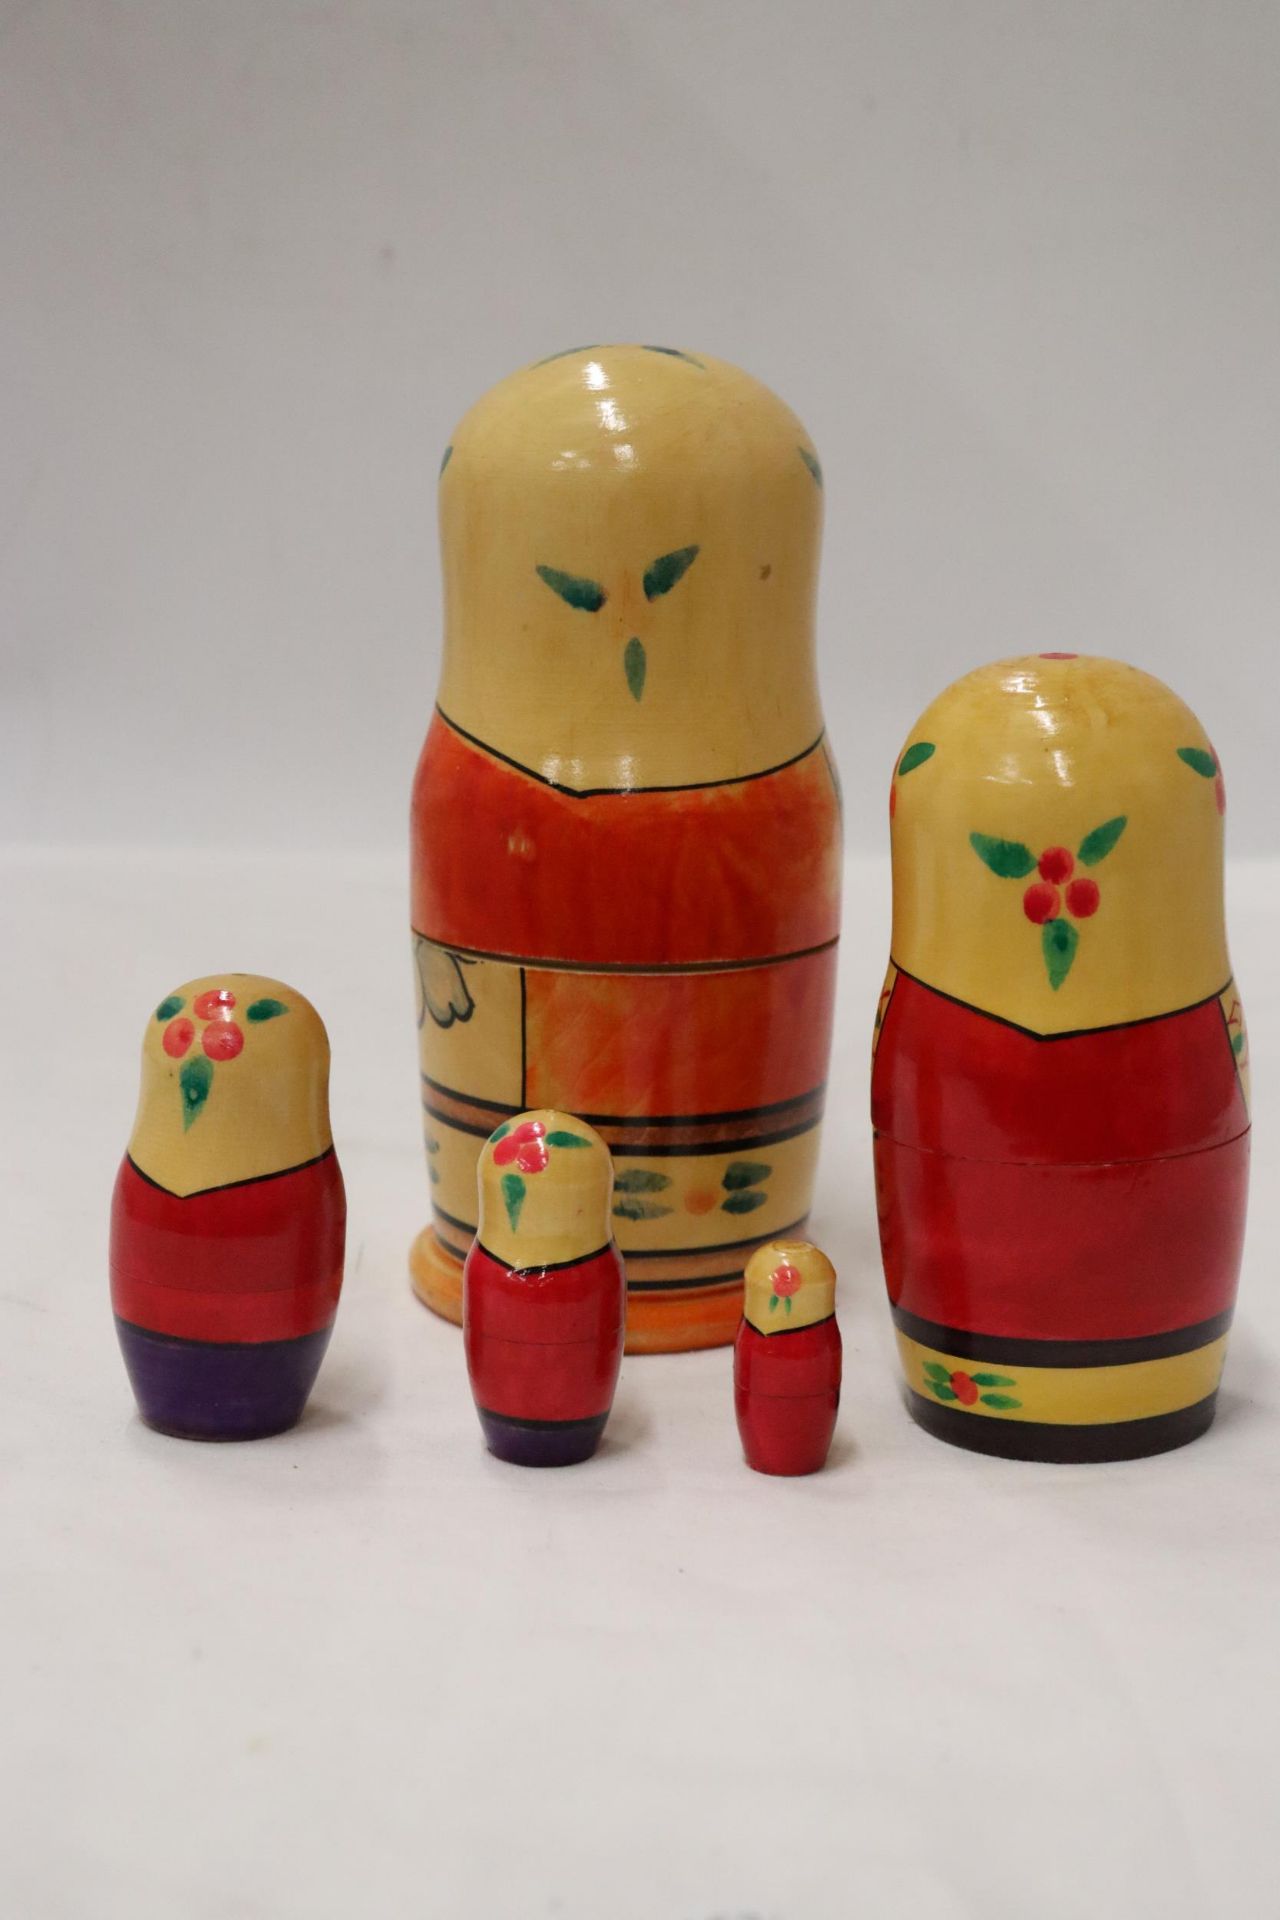 A LARGE RUSSIAN NESTING DOLL - Image 6 of 7